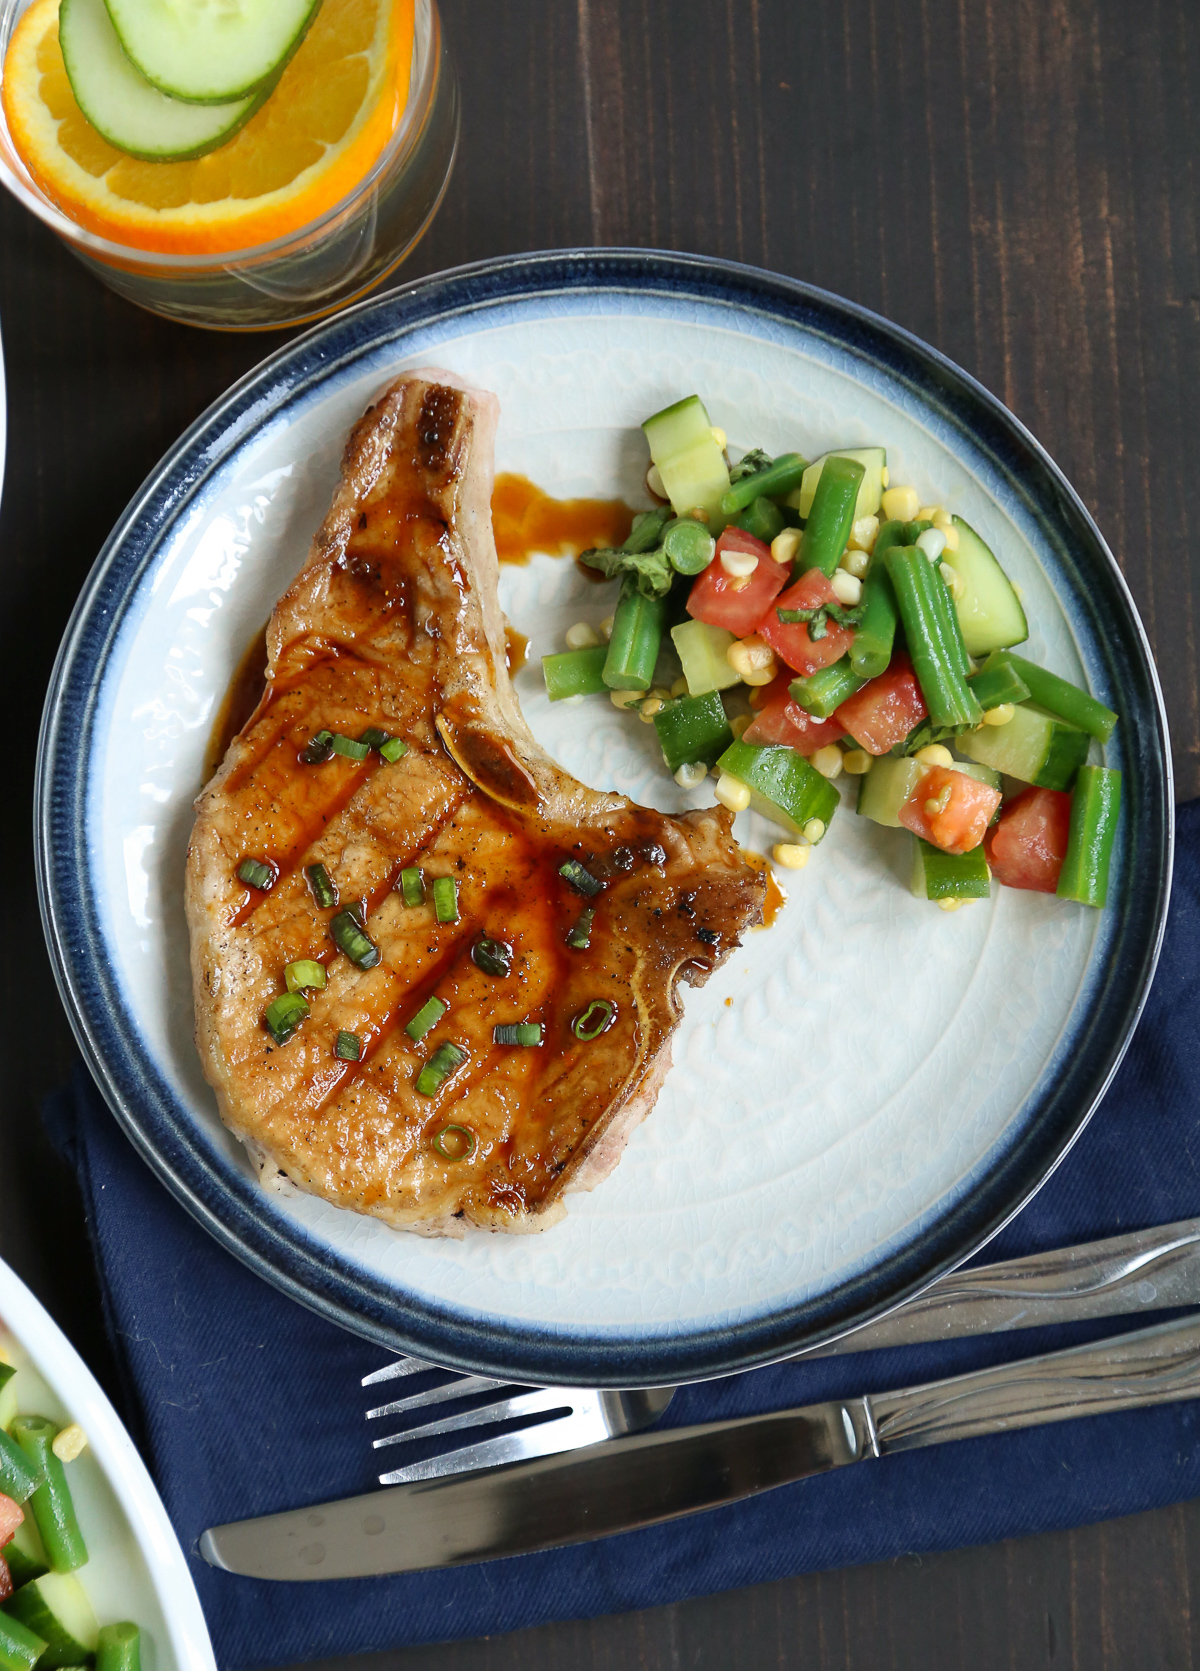 a glazed pork chop with honey and soy, and a summer vegetable salad on a white plate with a blue rim.